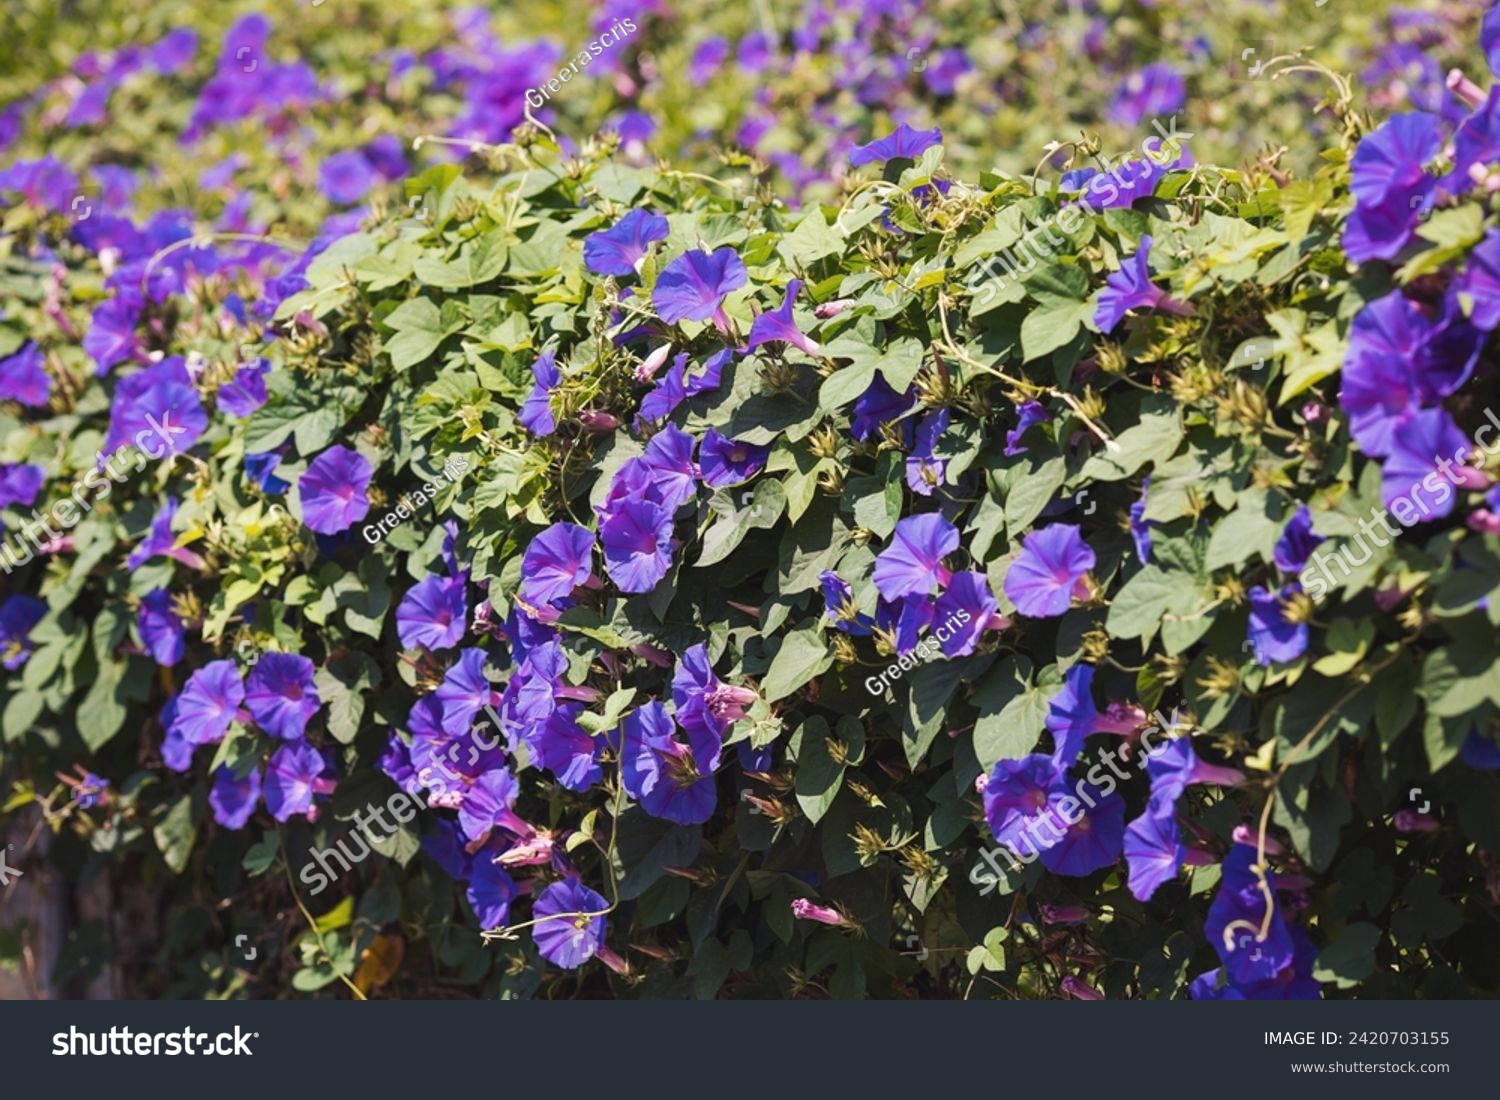 Selective focus of purple blue flower with green leaves as background, Ipomoea is a genus in the flowering plant family Convolvulaceae, Common names morning glory, water convolvulus or kangkung. #2420703155